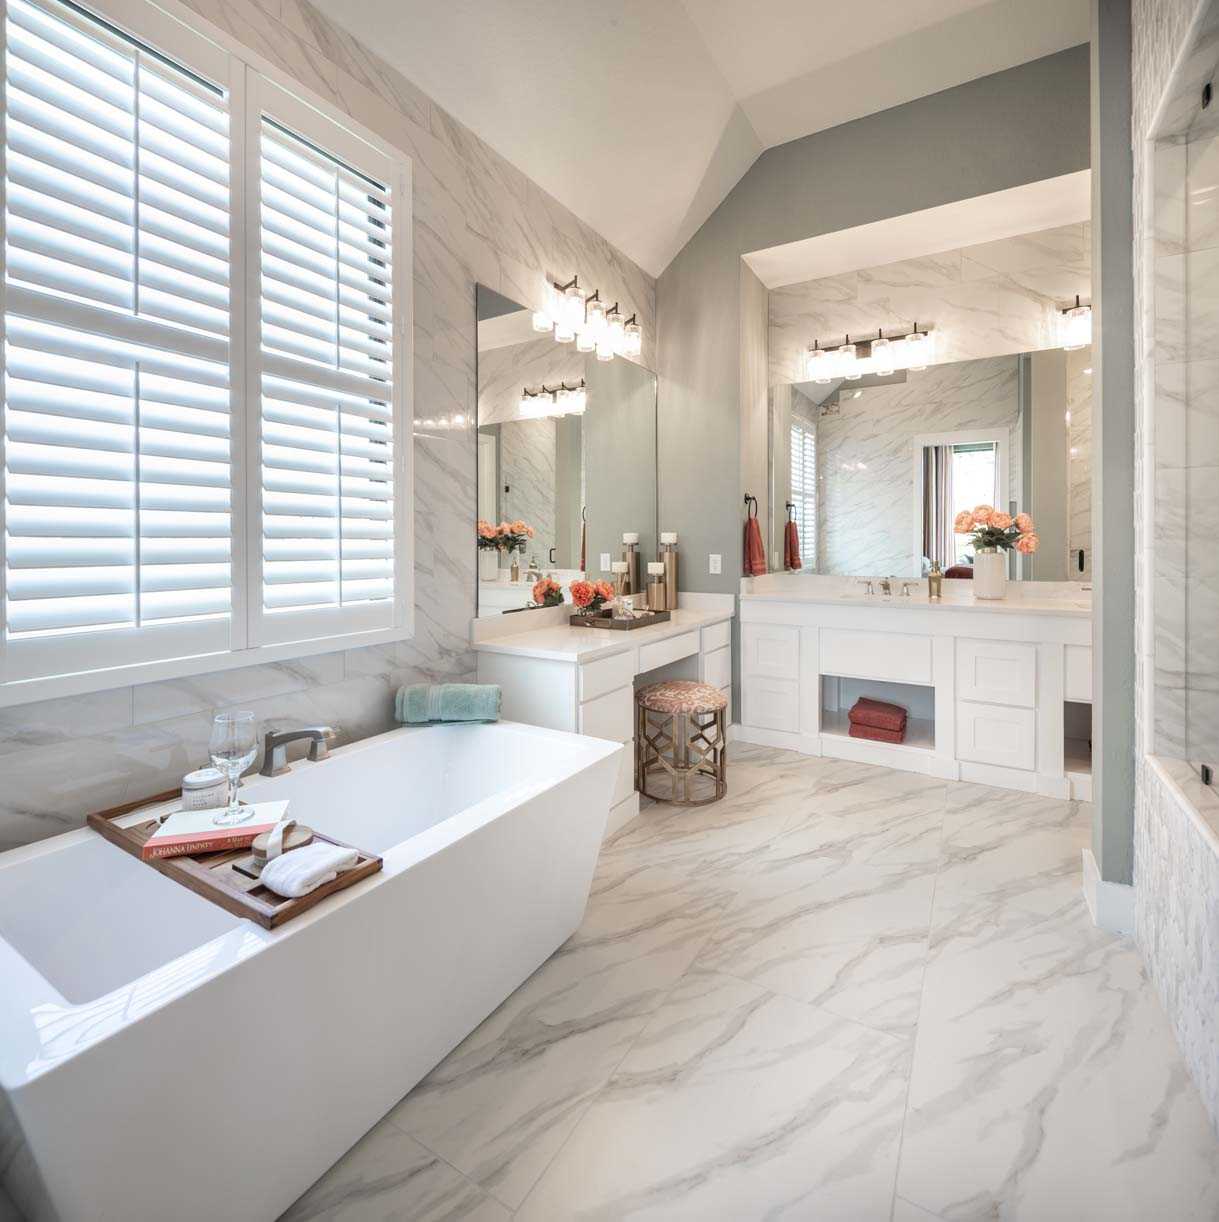 Spacious modern bathroom in a new home with marble finishes, featuring a freestanding tub, dual sink vanity, and large windows with shutters.